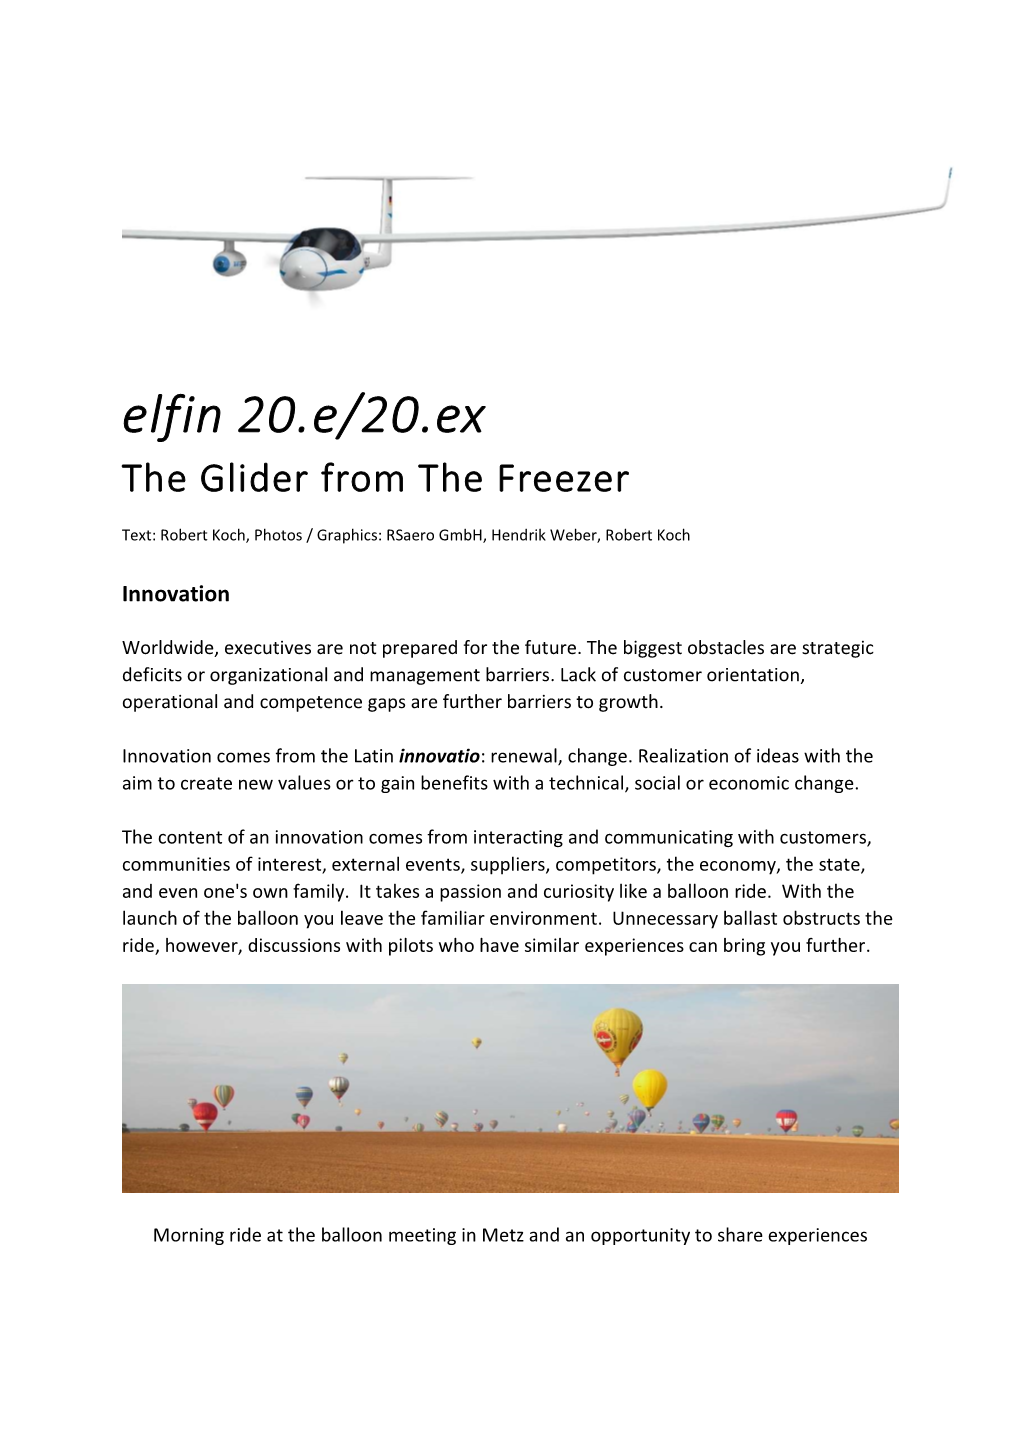 Elfin 20.E/20.Ex the Glider from the Freezer